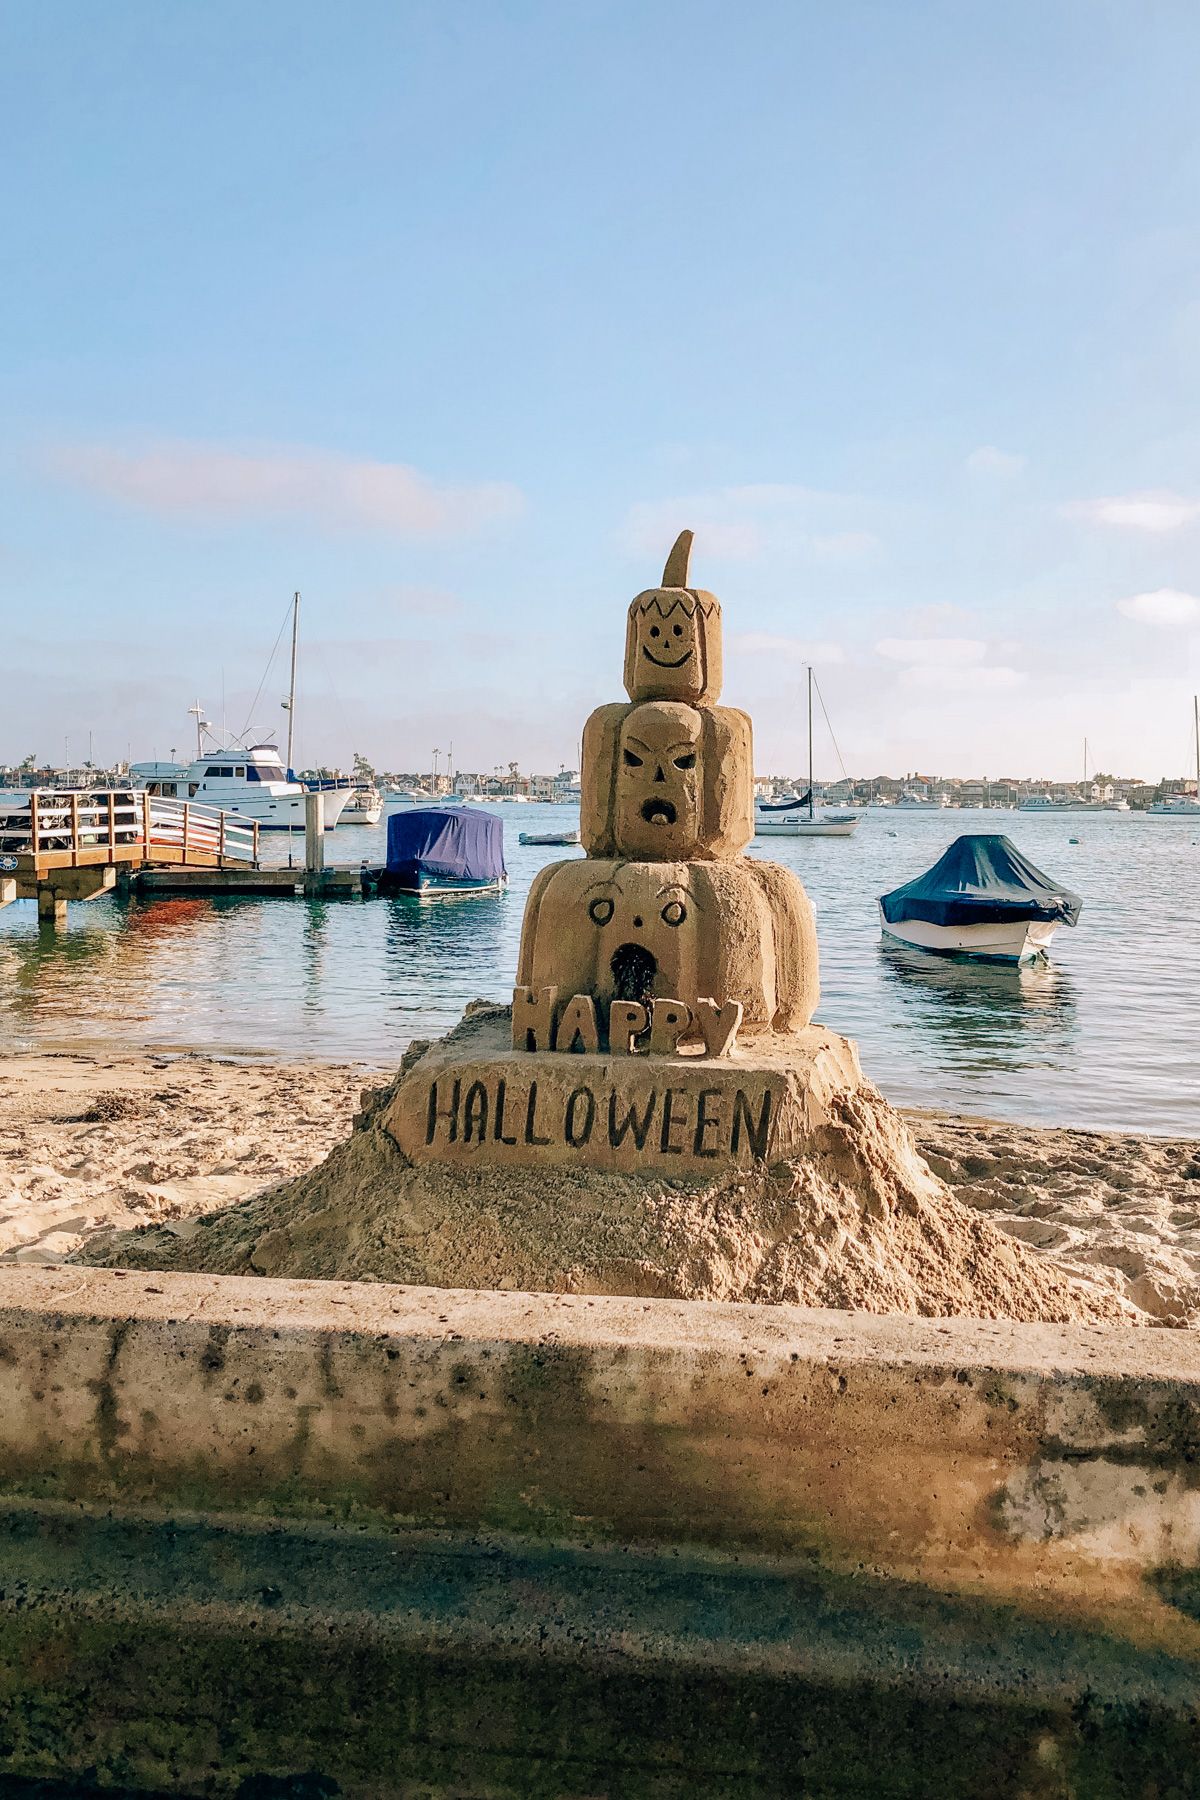 Halloween Events in Orange County: A Hallloween-themed sandcastle with the words, "Happy Halloween" carved into it on a beach with a a dock and boats in the background.